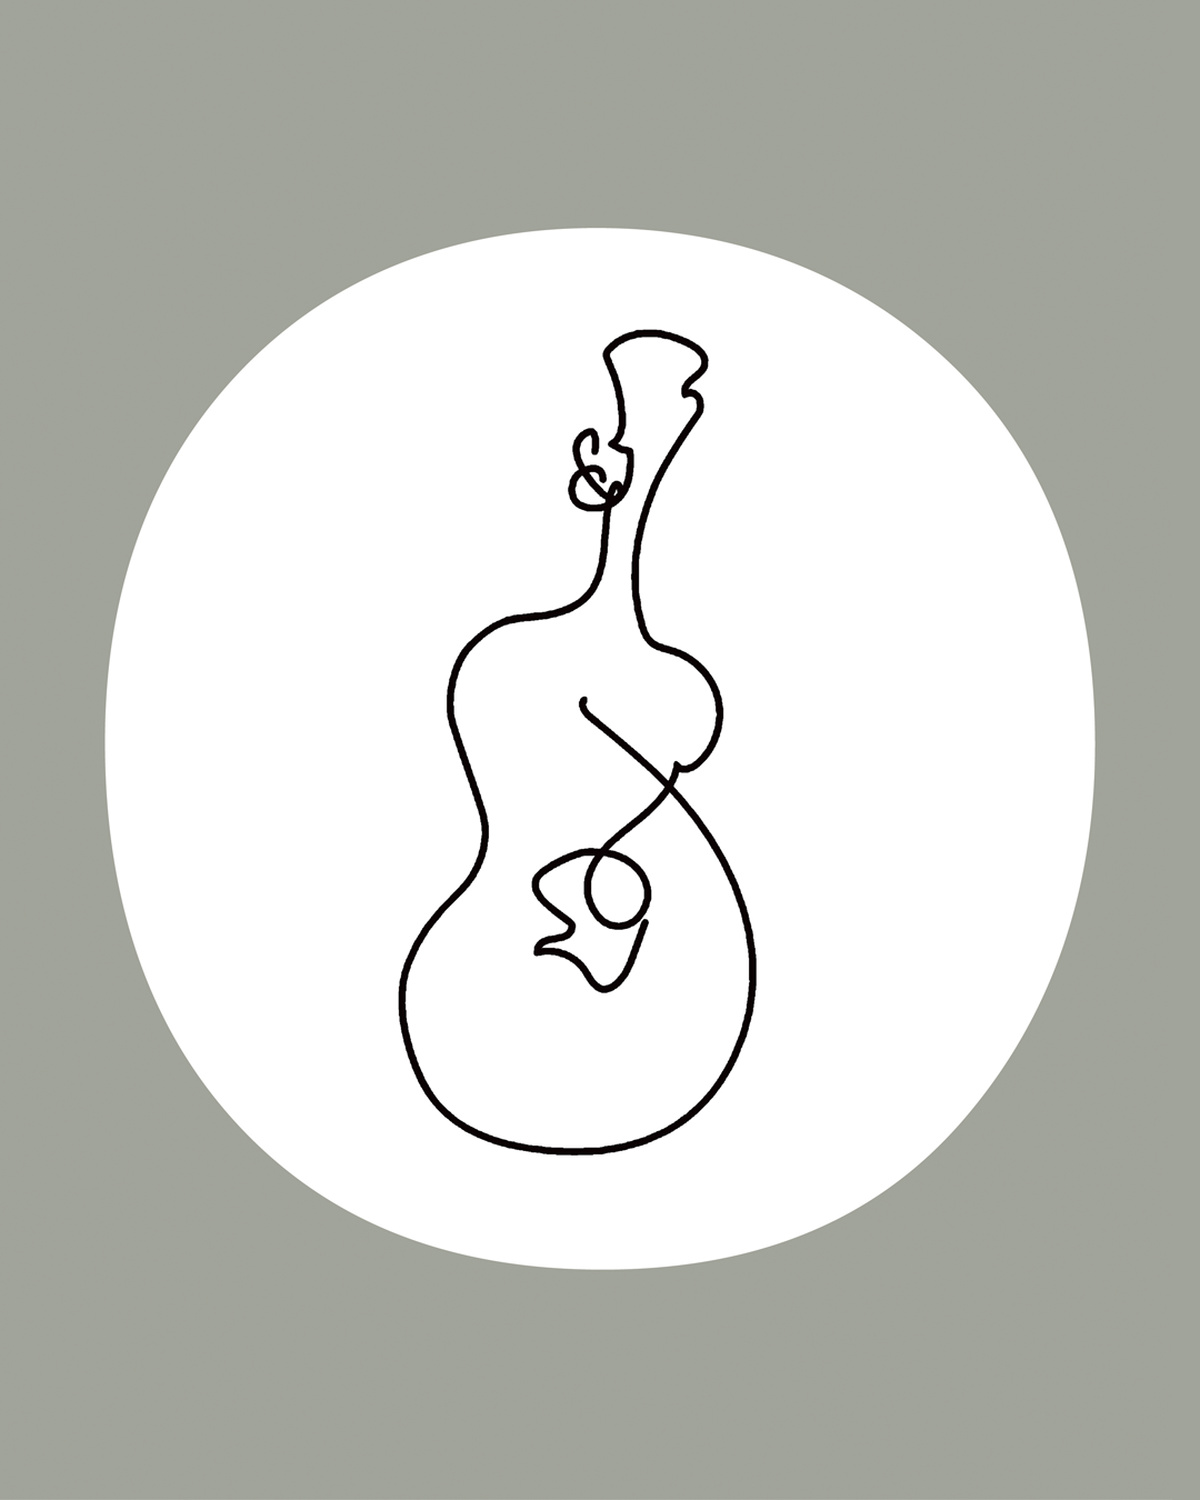 A line drawing doodle resembling a guitar.